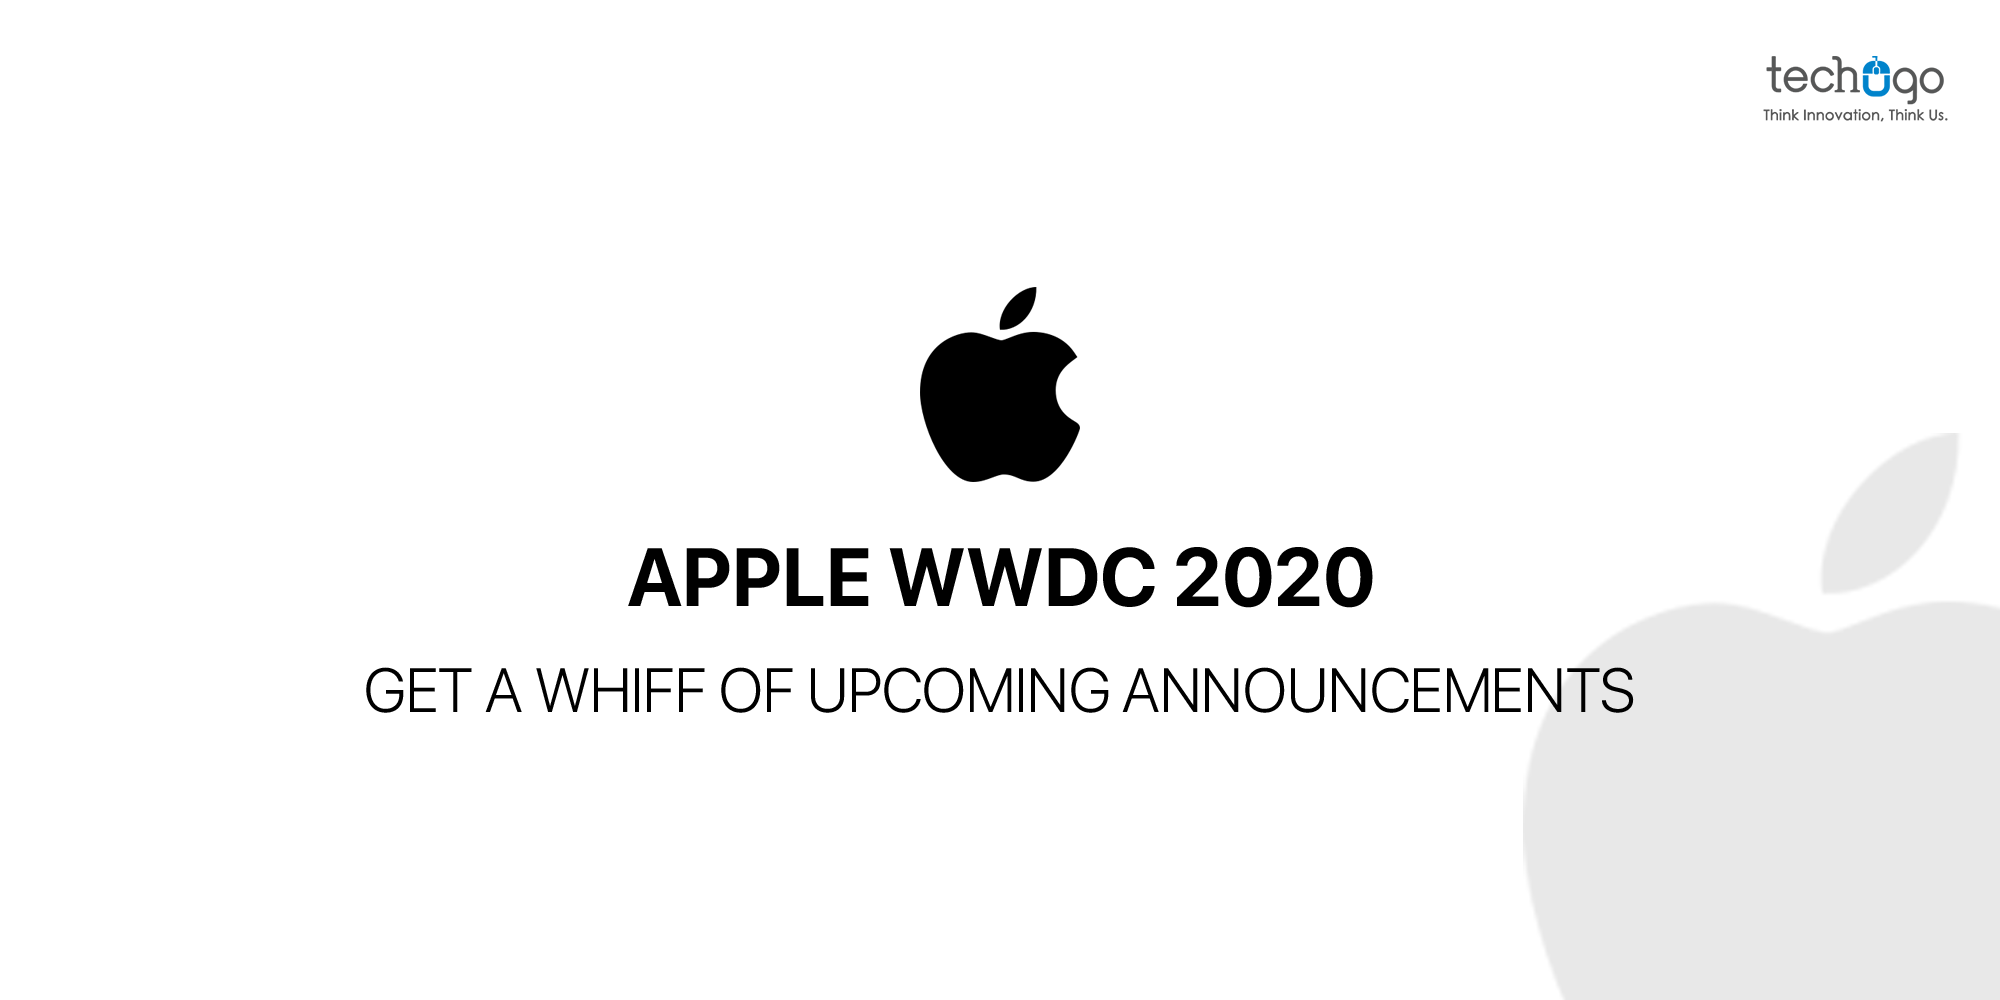 Apple WWDC 2020: Get A Whiff Of Upcoming Announcements